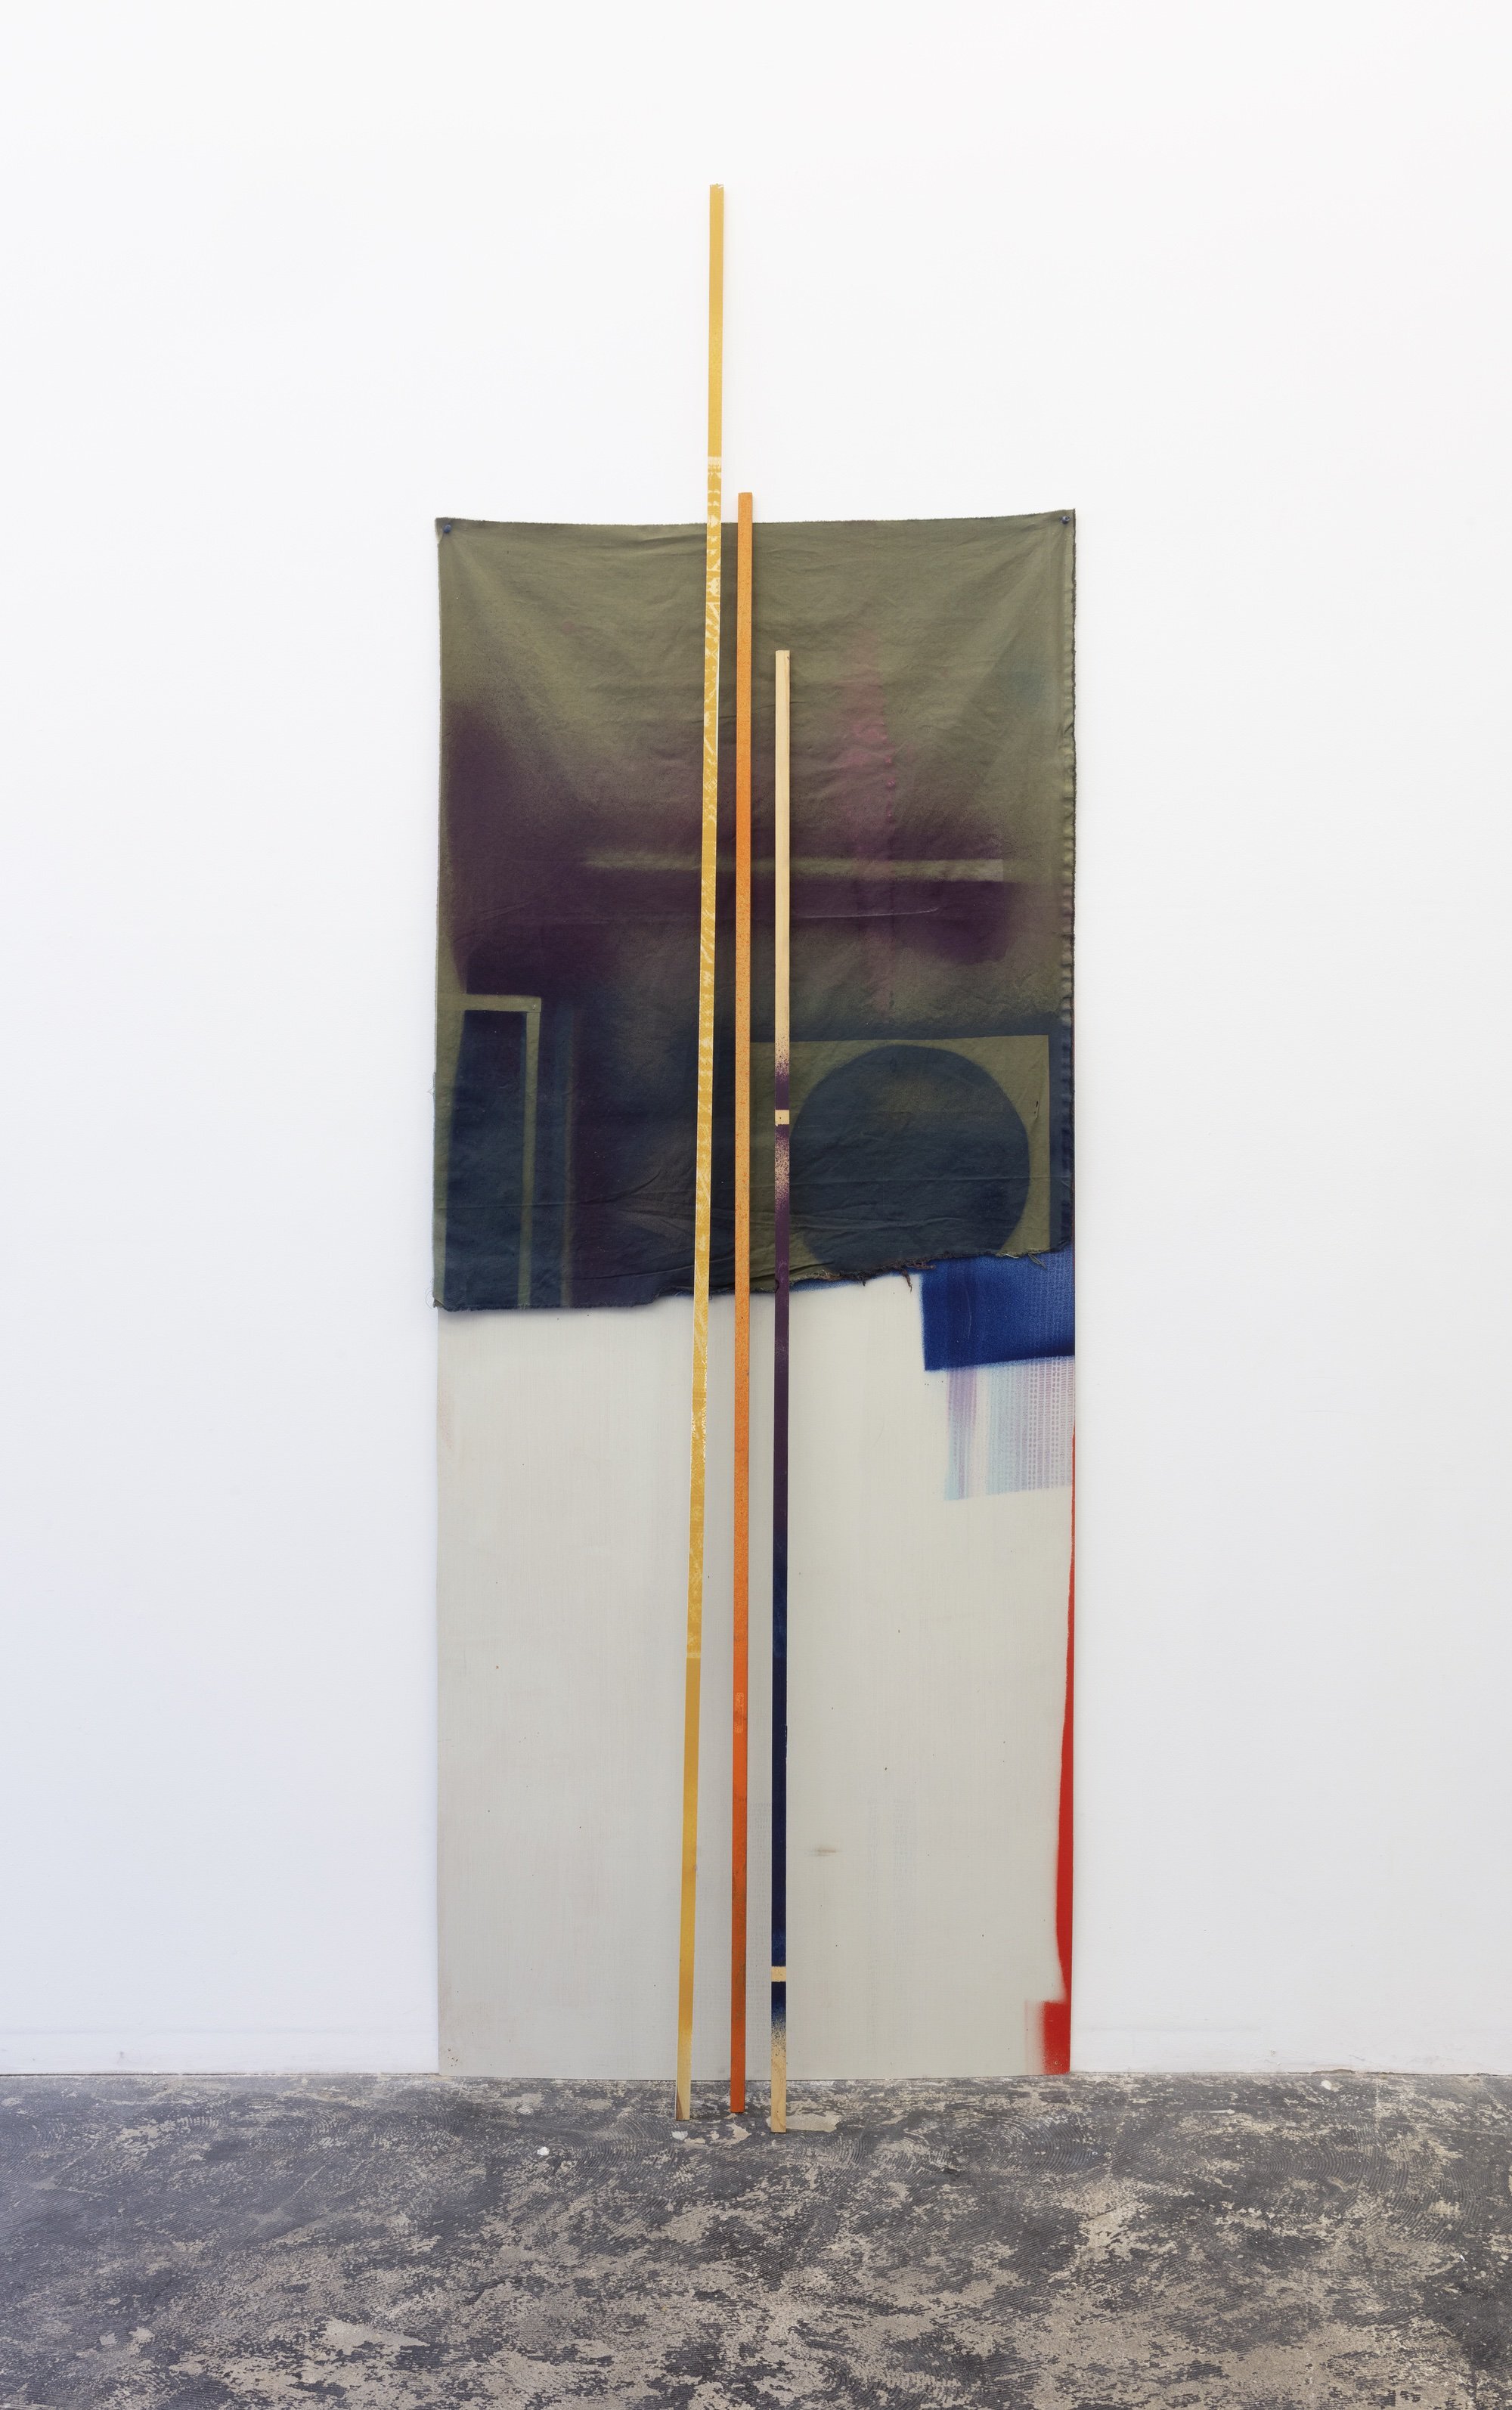  Cybele Lyle  Desert Walls 10 , 2021 Wood panel, acrylic paint, wood, fabric 80 x 32 inches + variable 